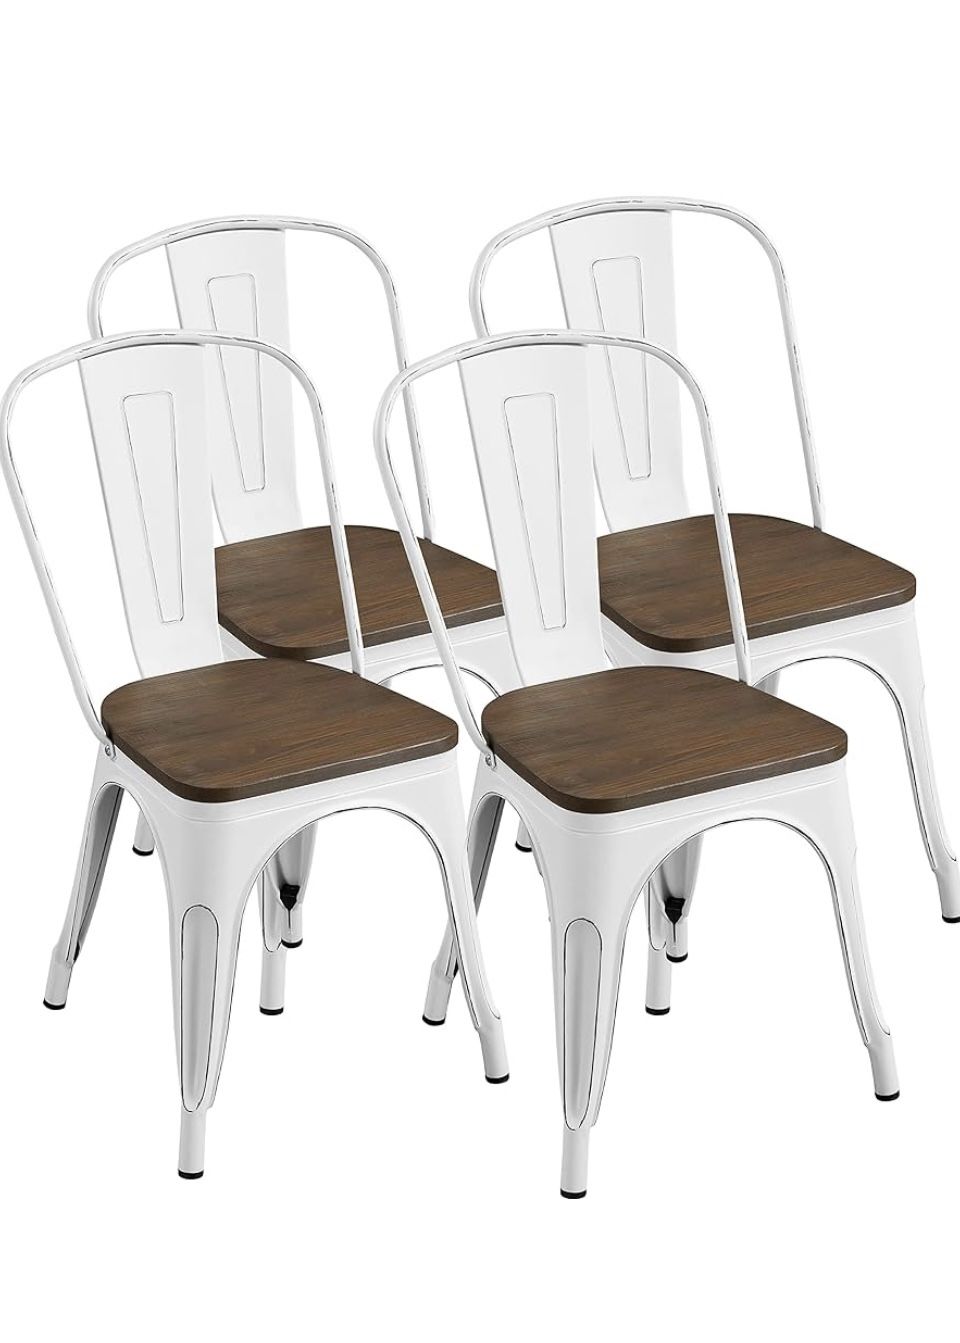 Set of 4 Metal Dining Chairs